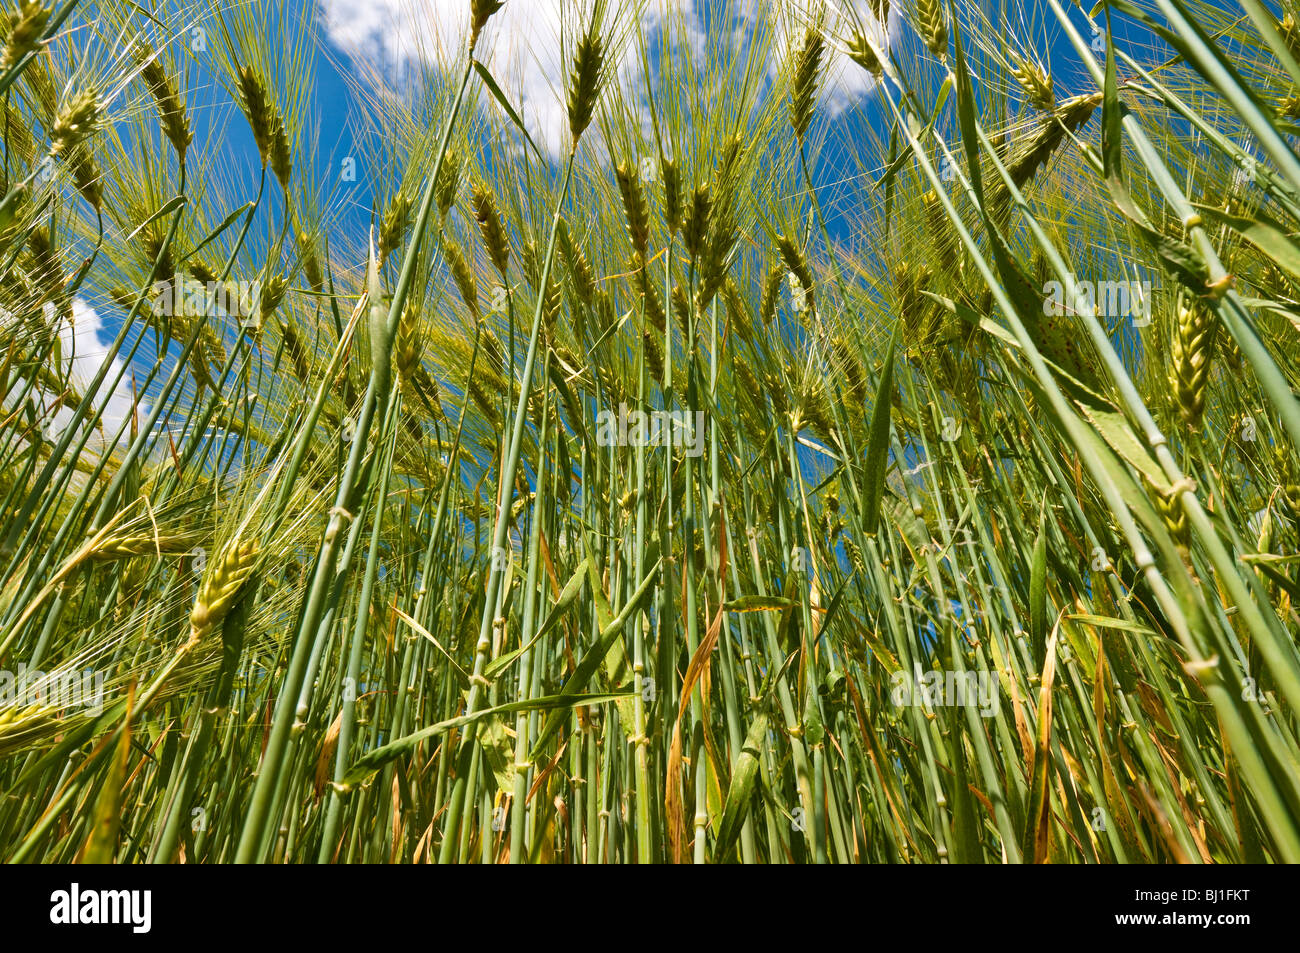 Worm's eye view of Barley field - Indre-et-Loire, France. Stock Photo